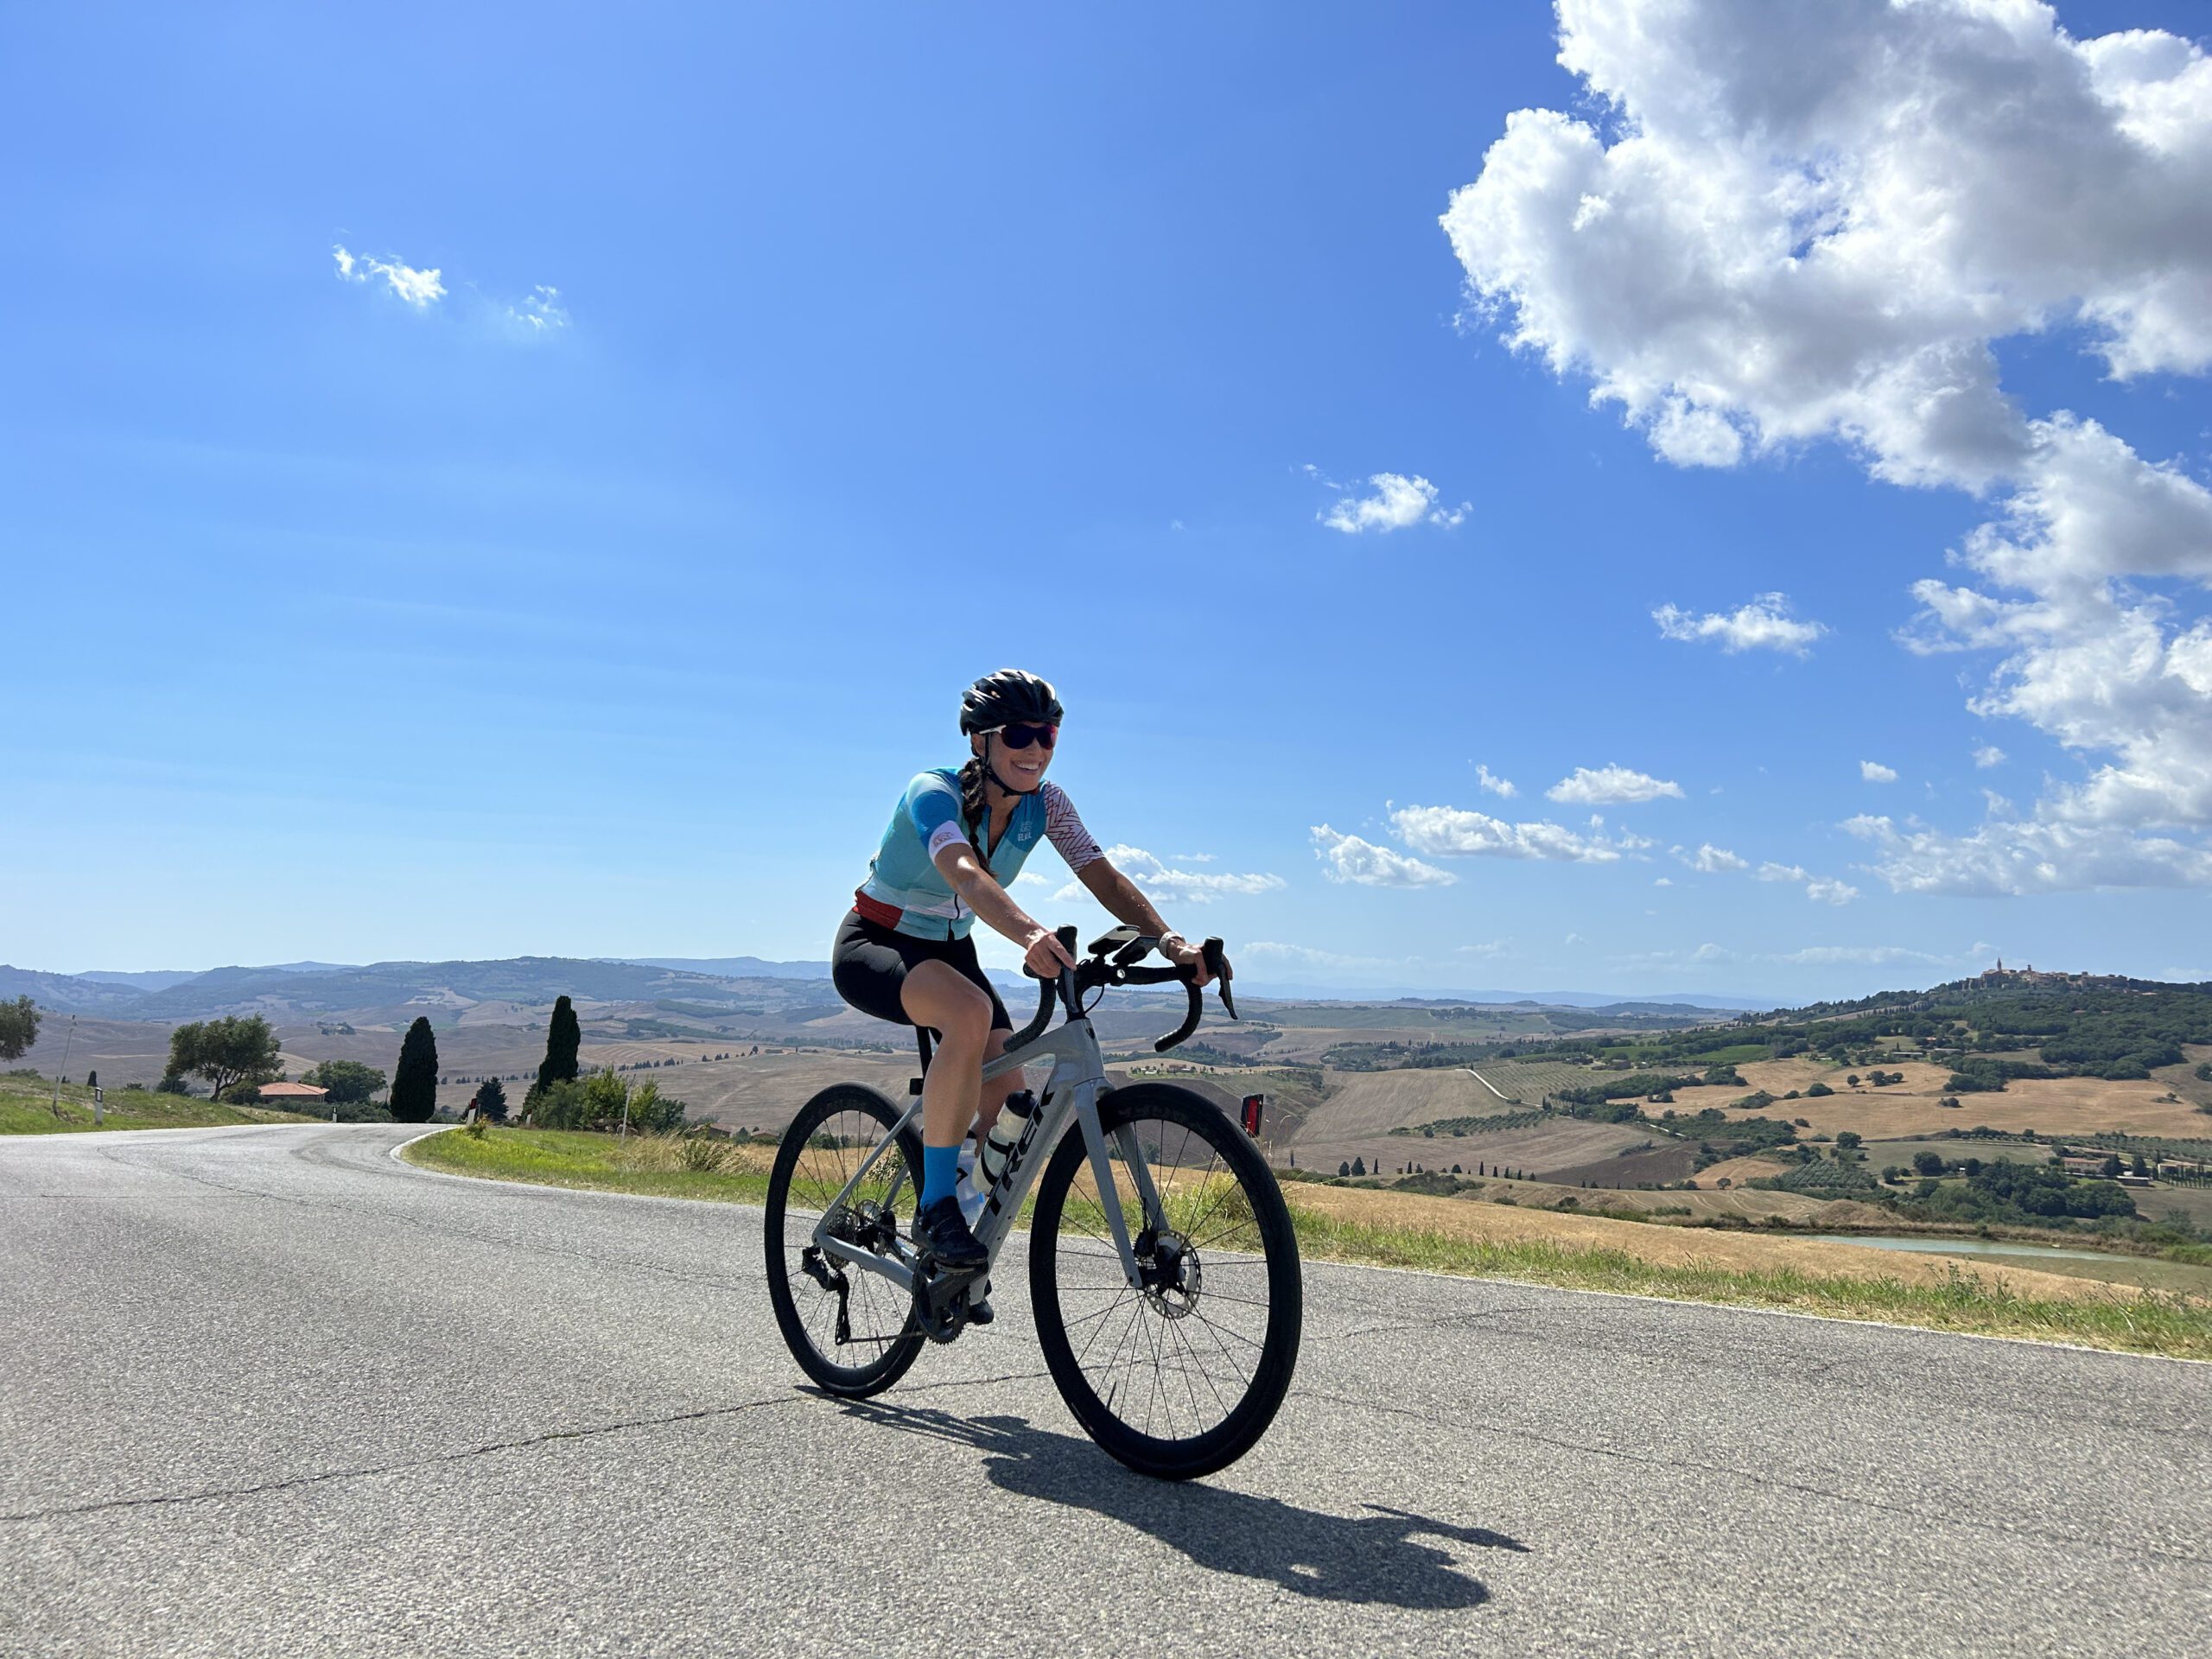 Smiling cyclist on a bright day with Tuscan landscape in the background